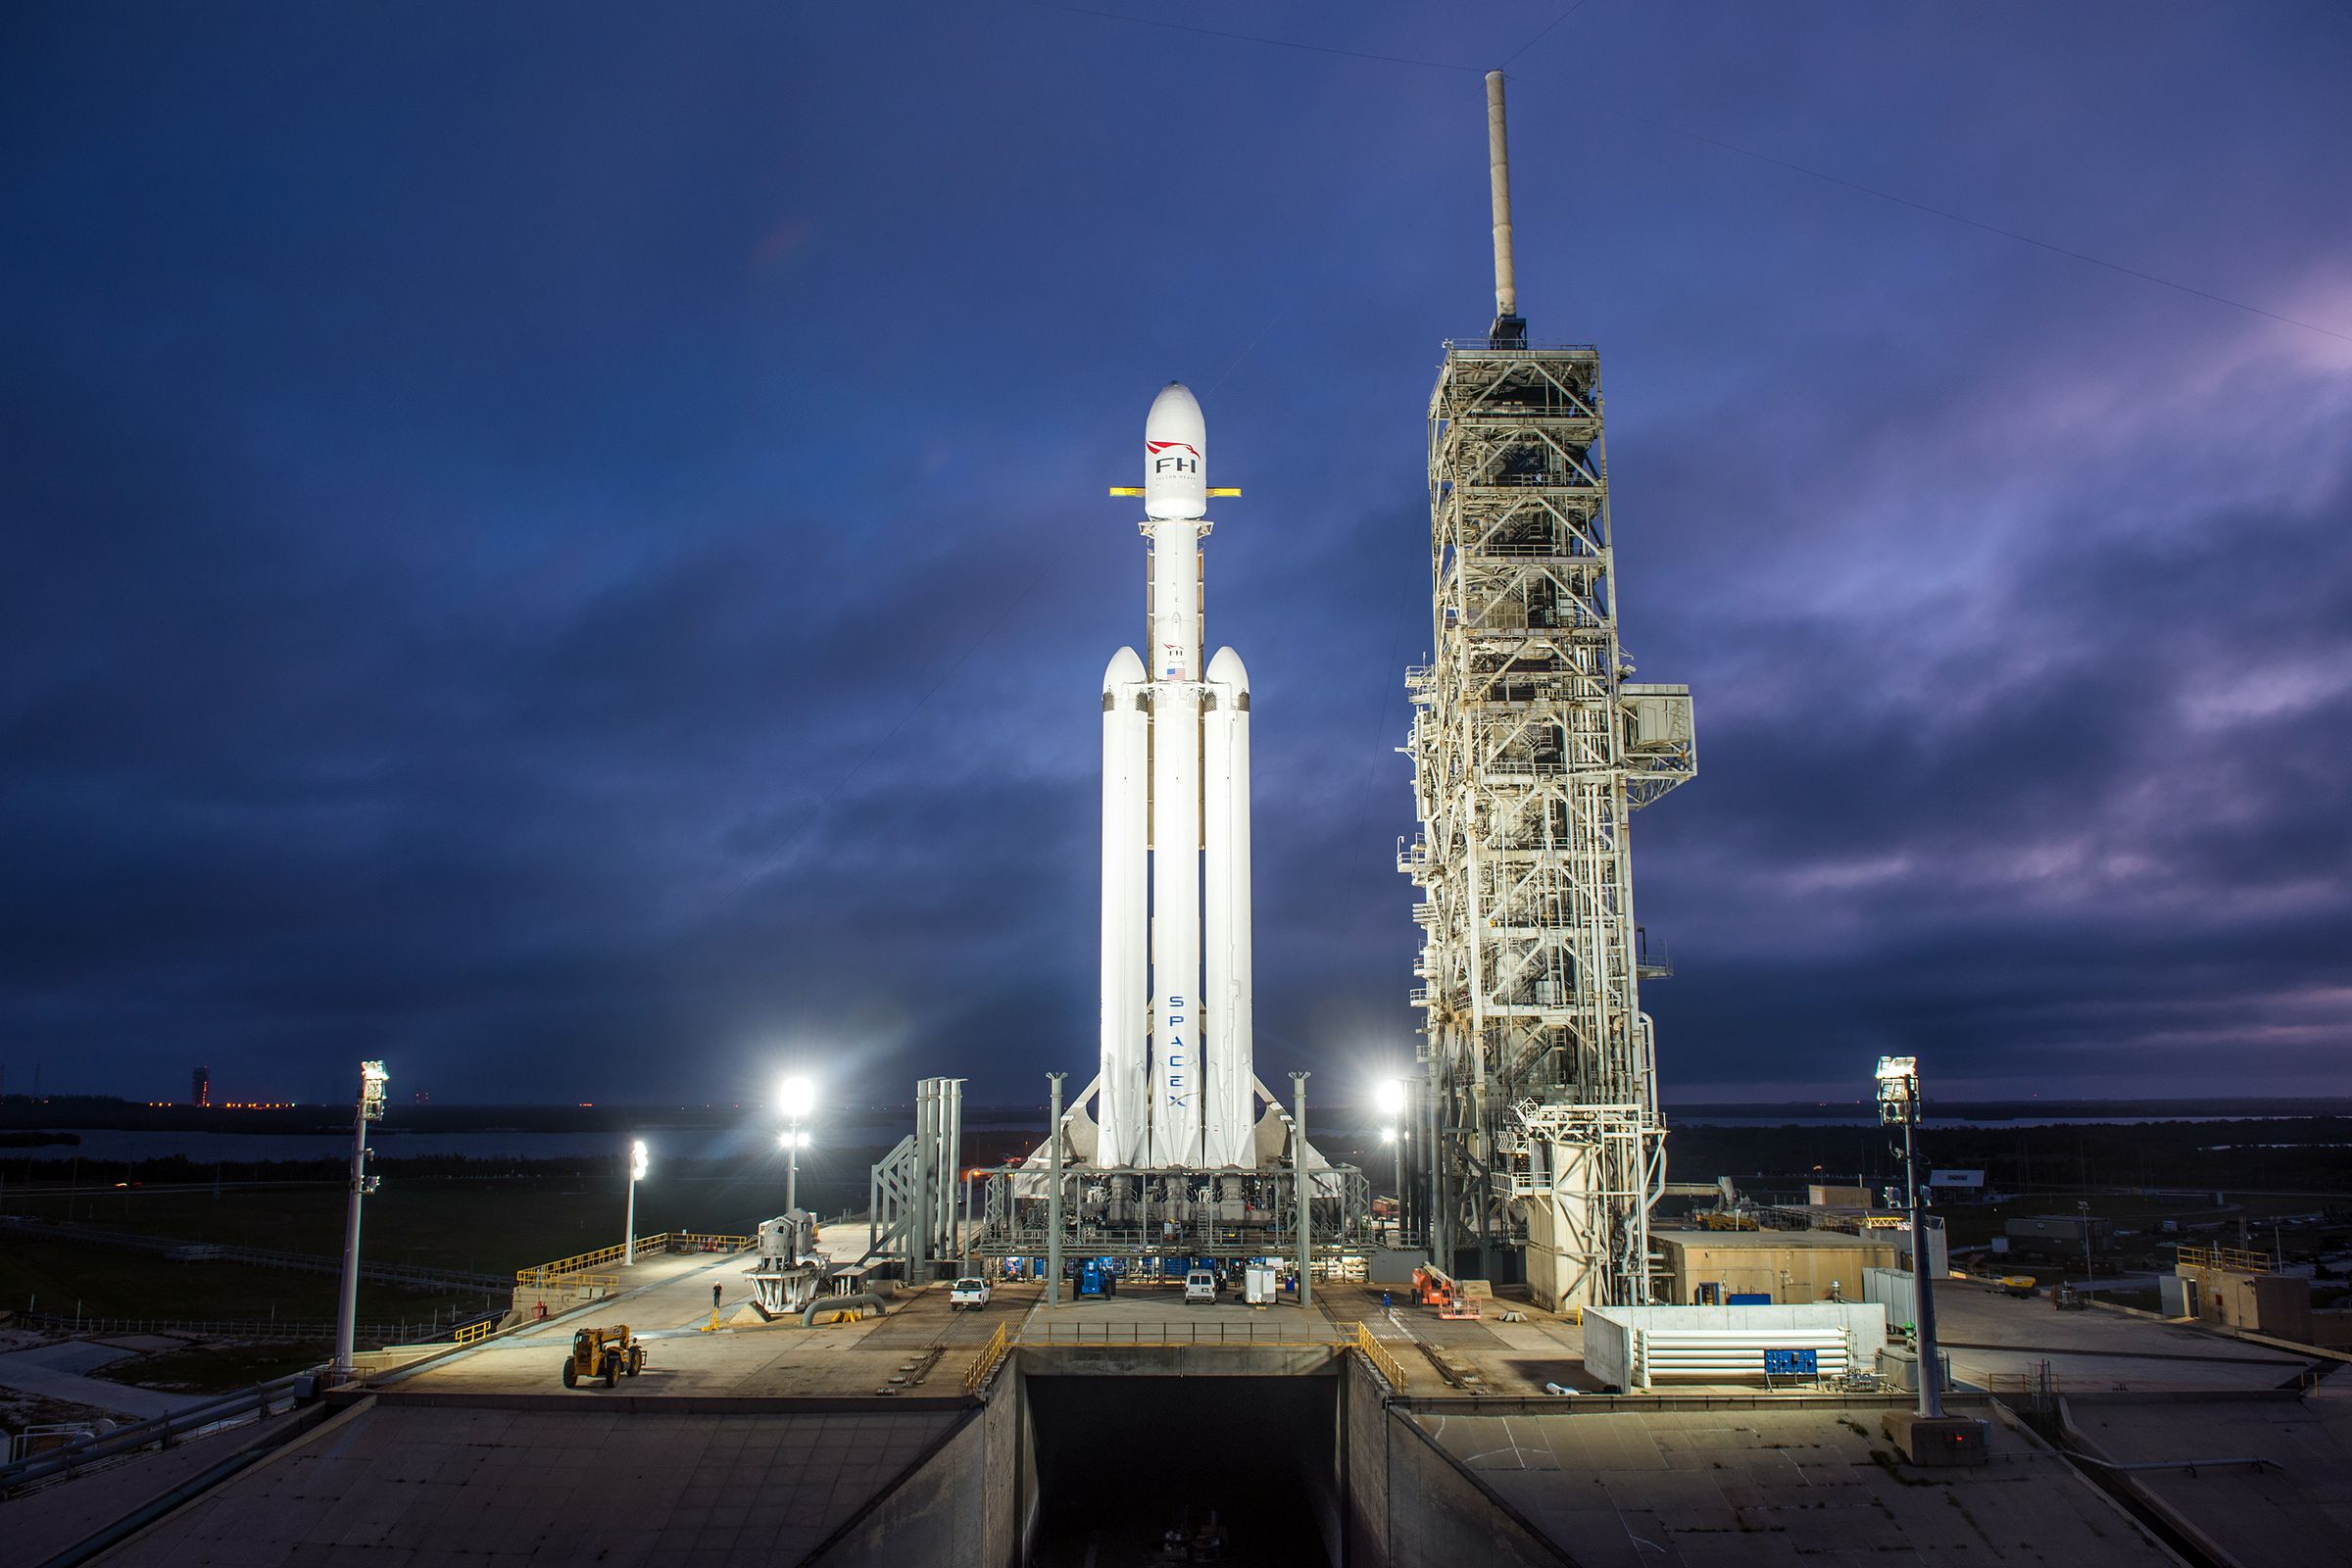 SpaceX’s Falcon Heavy rocket on its launchpad